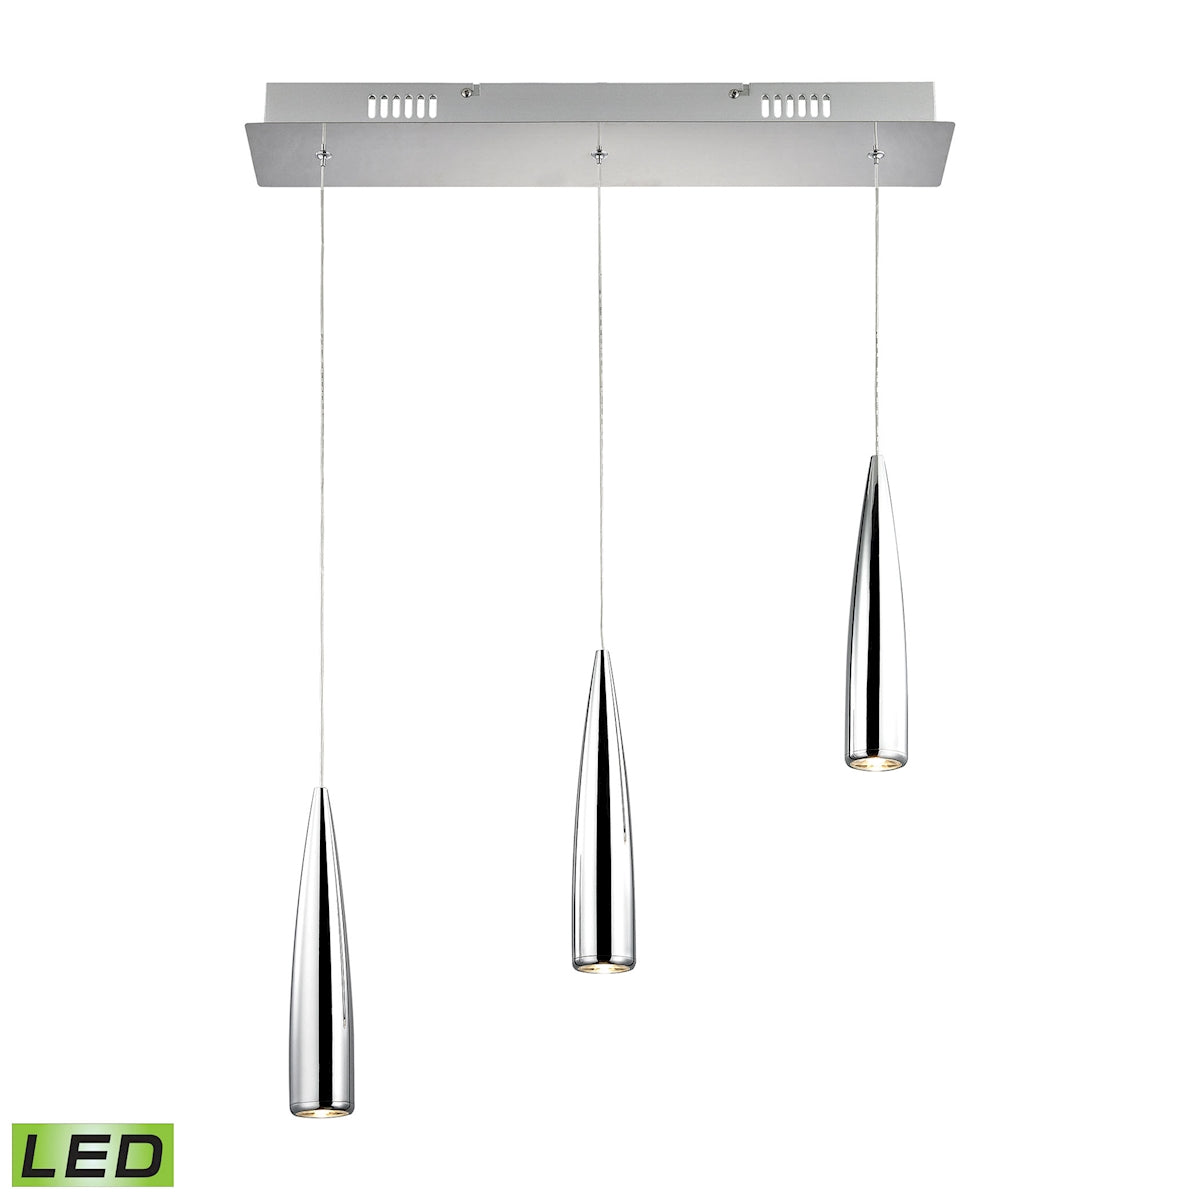 ELK Lighting LC703-15-15 Century 3-Light Linear Pendant Fixture in Chrome with Chrome Metal Shades - Integrated LED